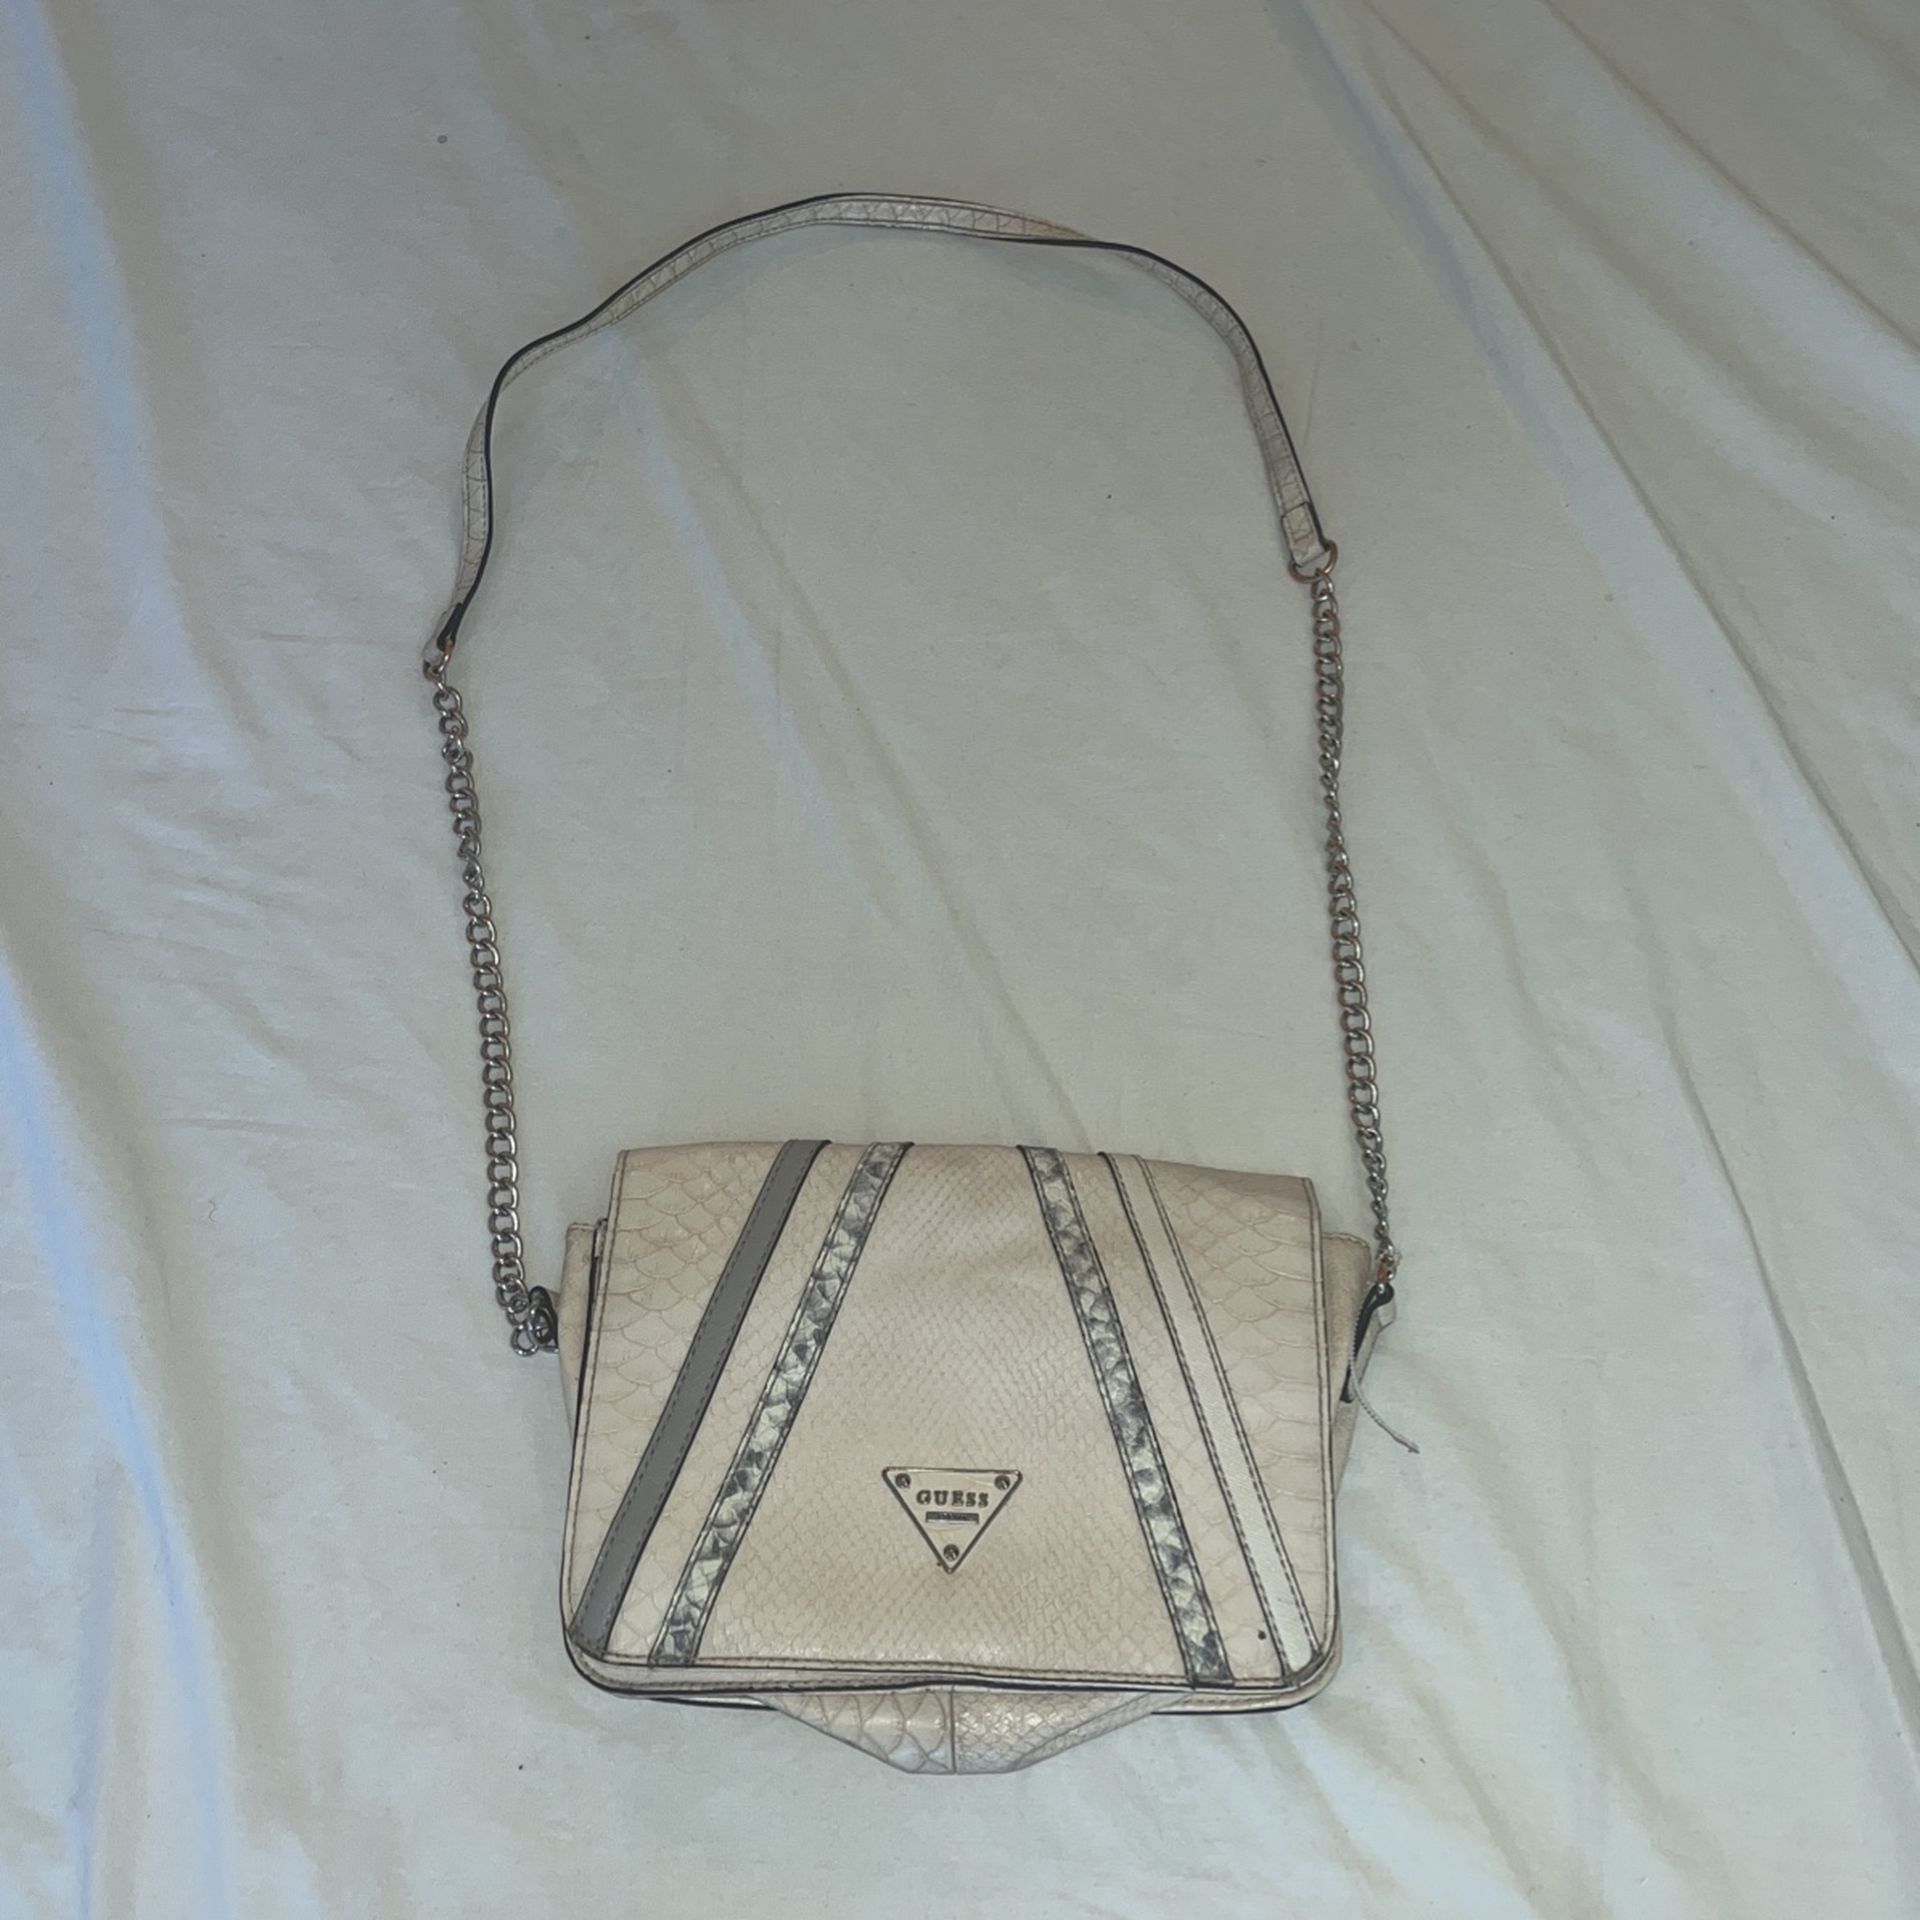 Guess Leather Handbag - Beige Leather With Faux  Crocodile Embossing - Crossbody